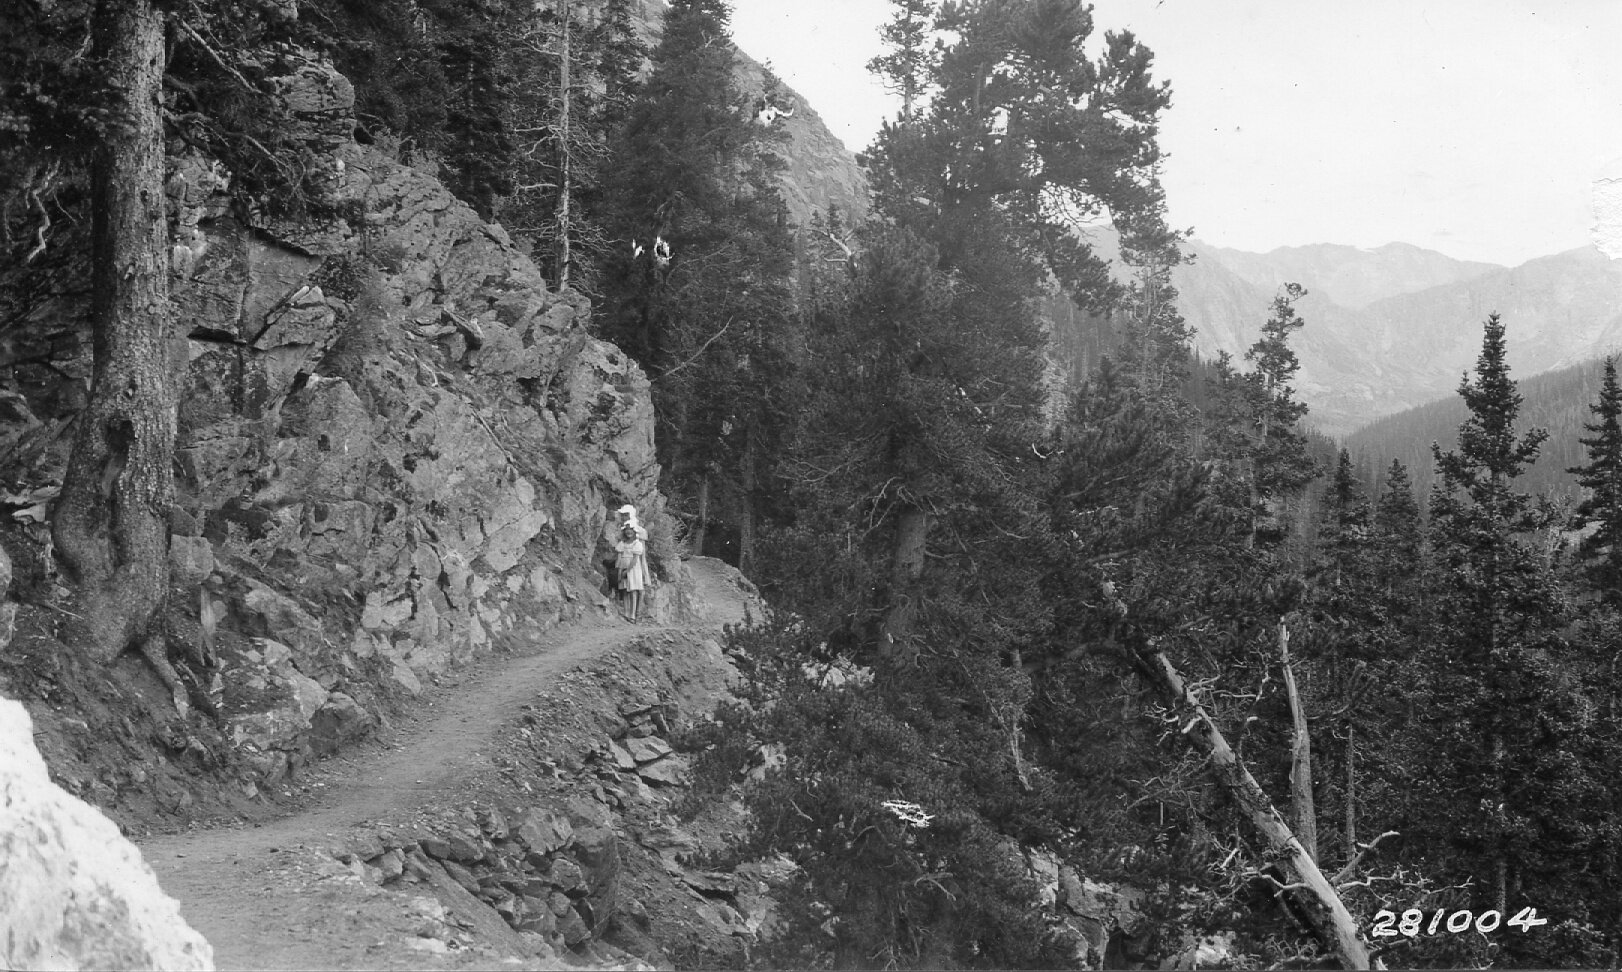  The Chicago Lakes trail from Echo Lake to the Idaho Springs Reservoir was even more perilous in 1933 than it is today. These young ladies would have had to be very careful! 